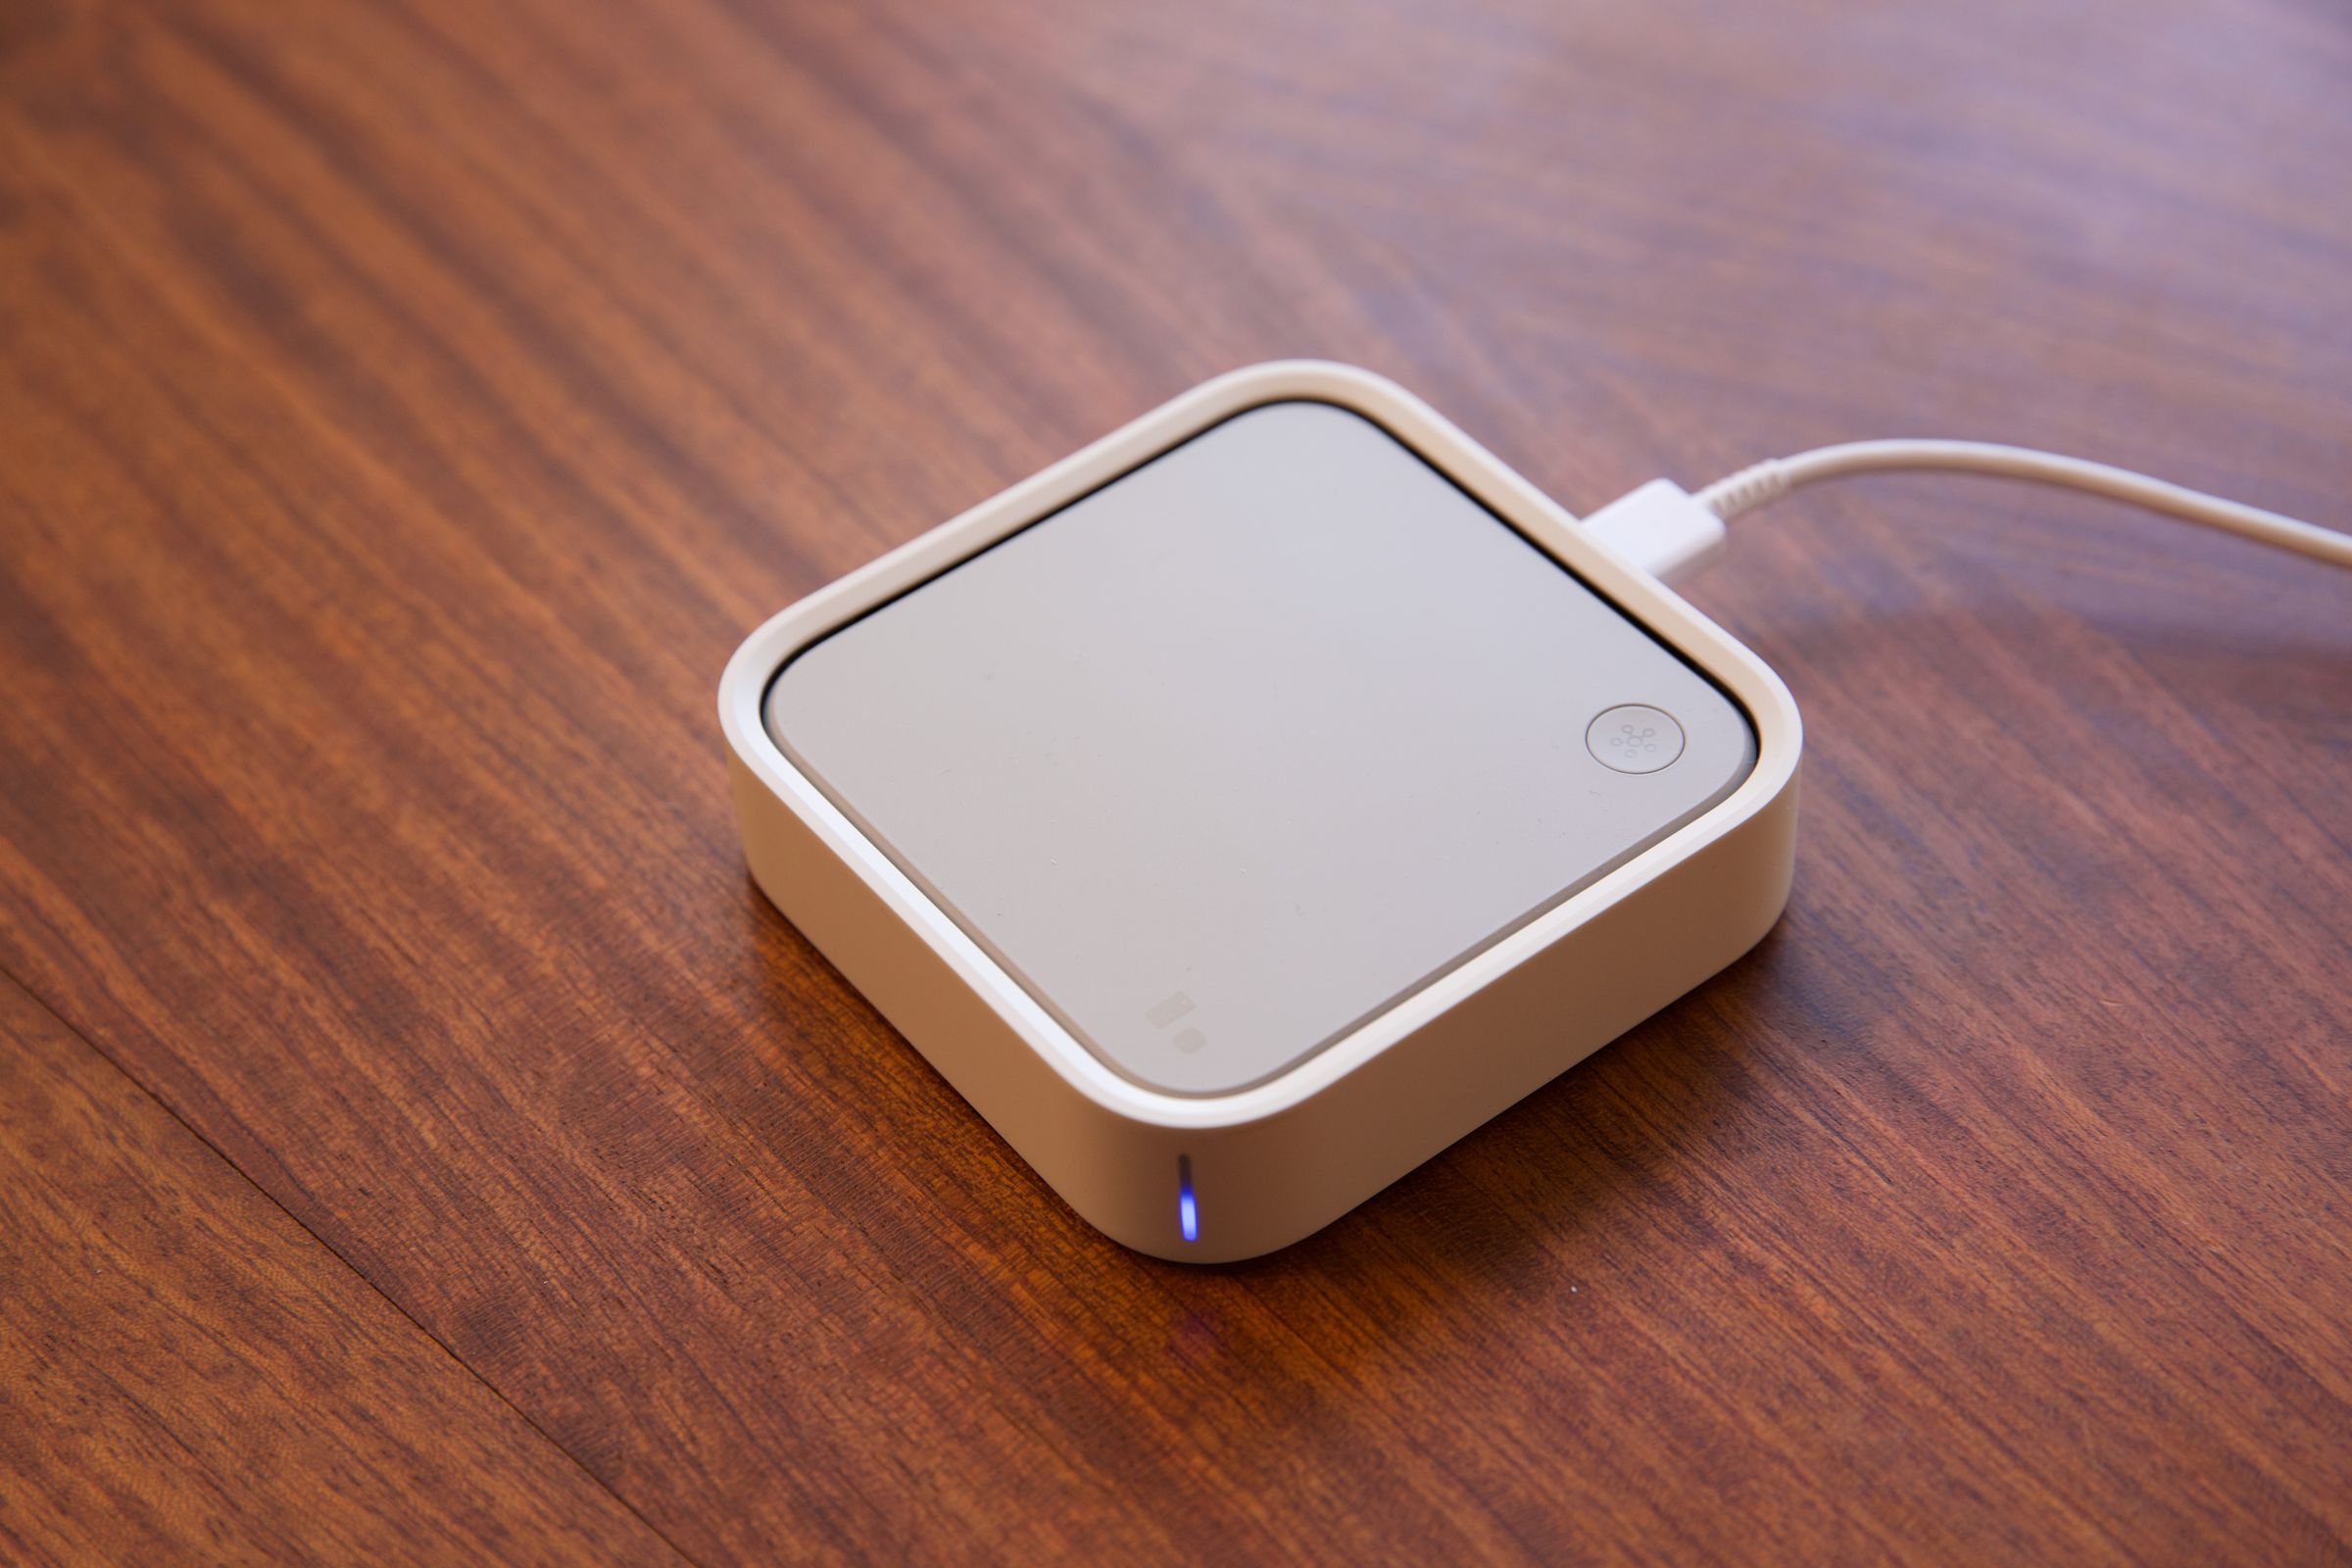 A SmartThings Station wireless charger / smart home hub